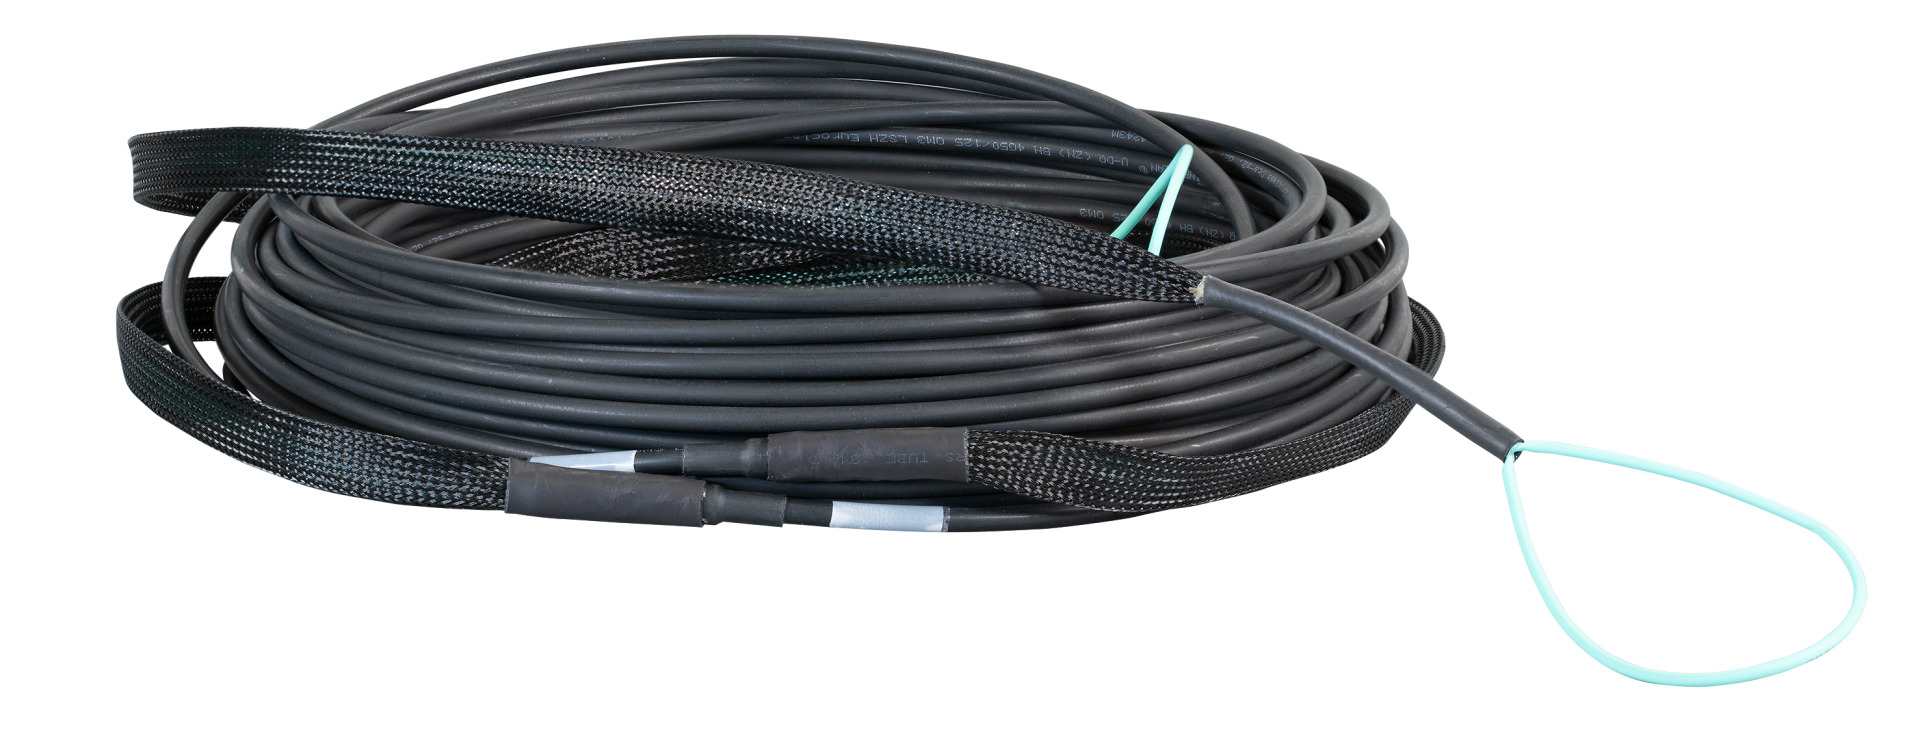 Trunk cable U-DQ(ZN)BH 8G 50/125, LC/LC OM3 180m